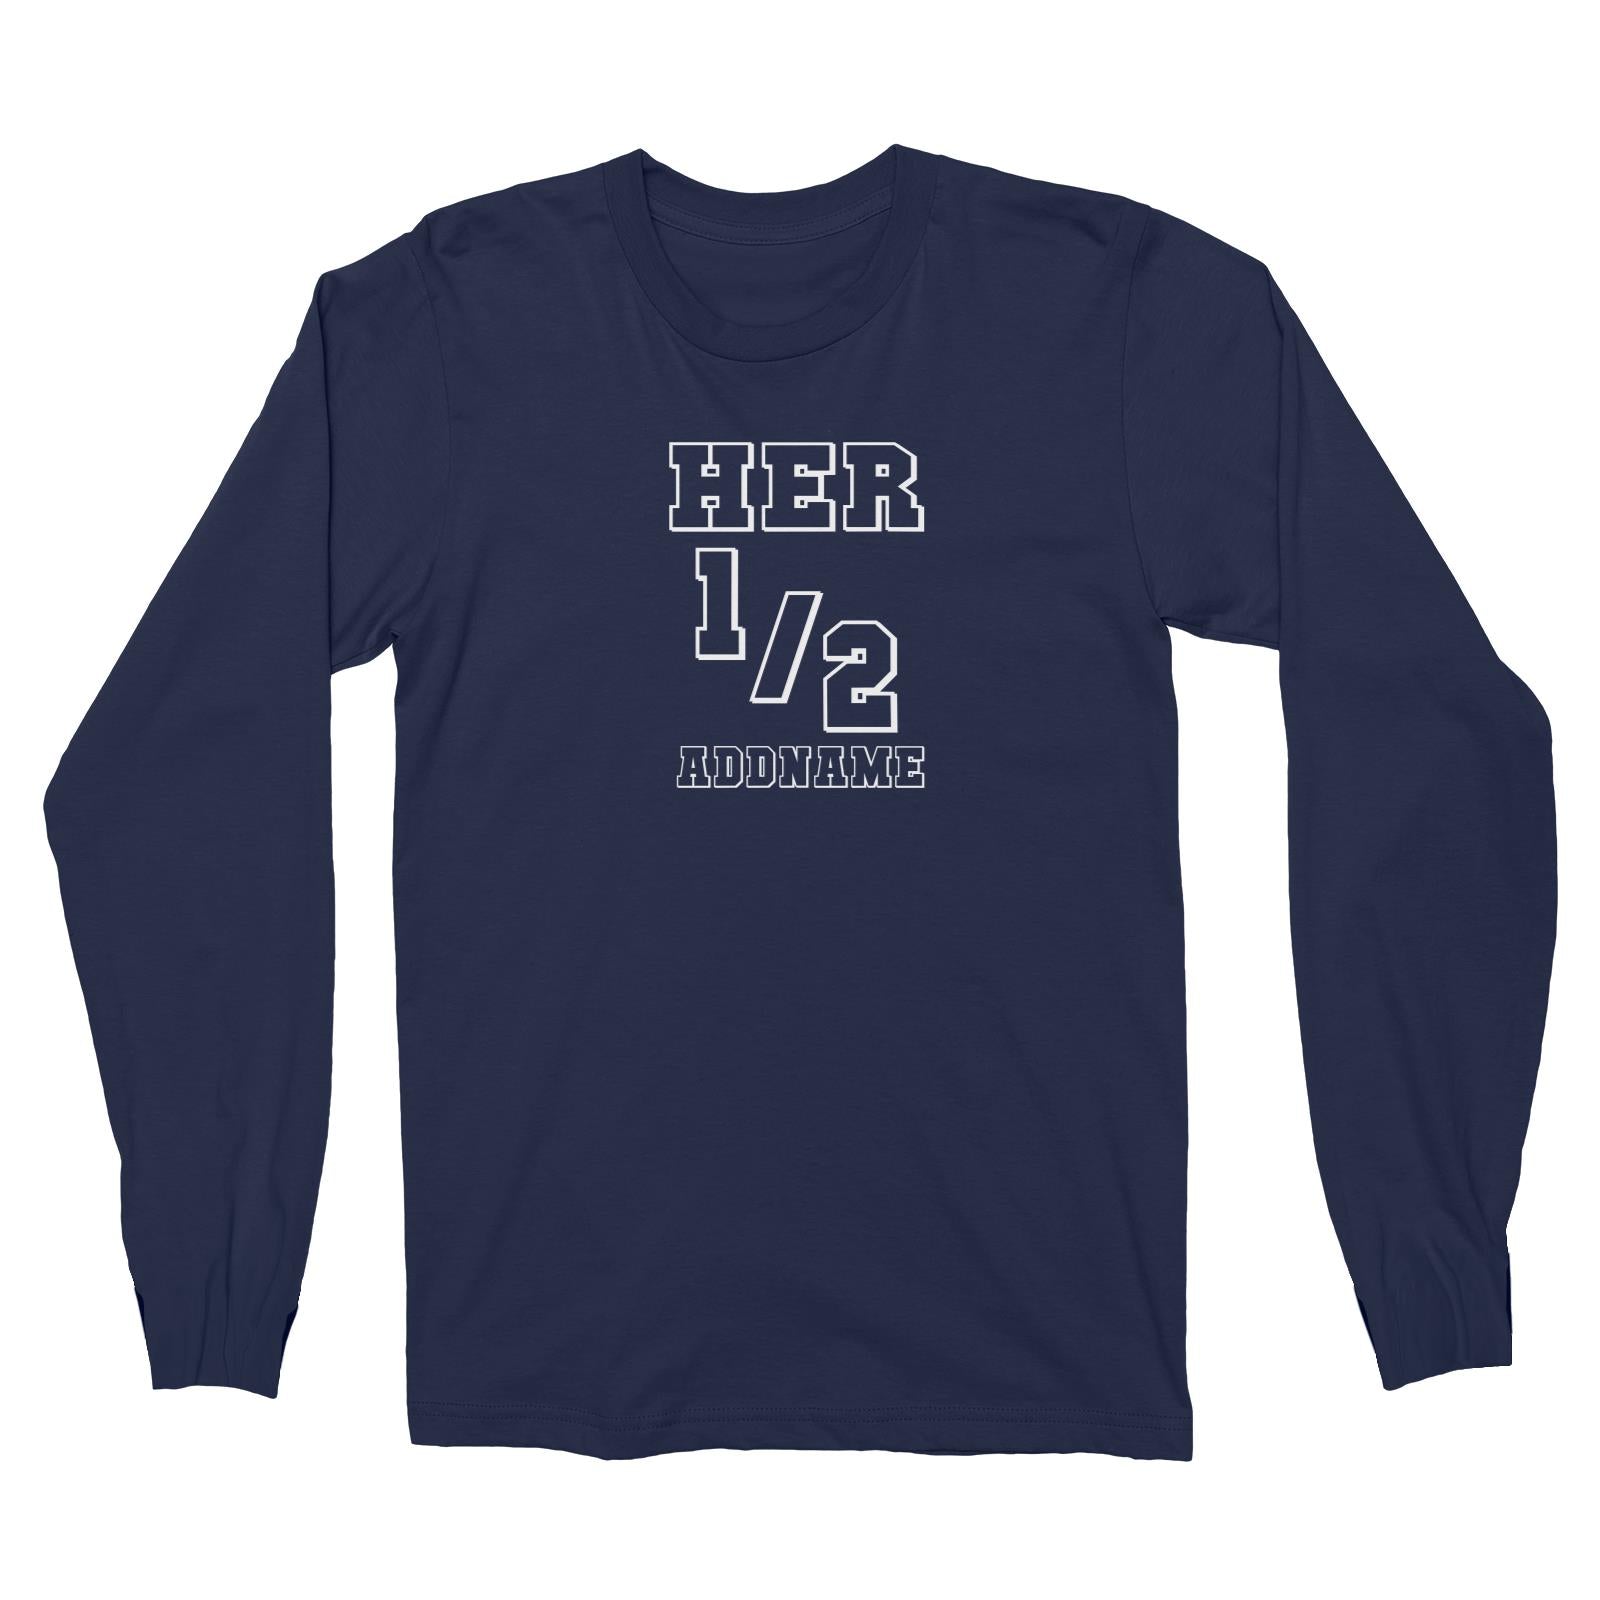 Couple Series Her Half Addname Long Sleeve Unisex T-Shirt